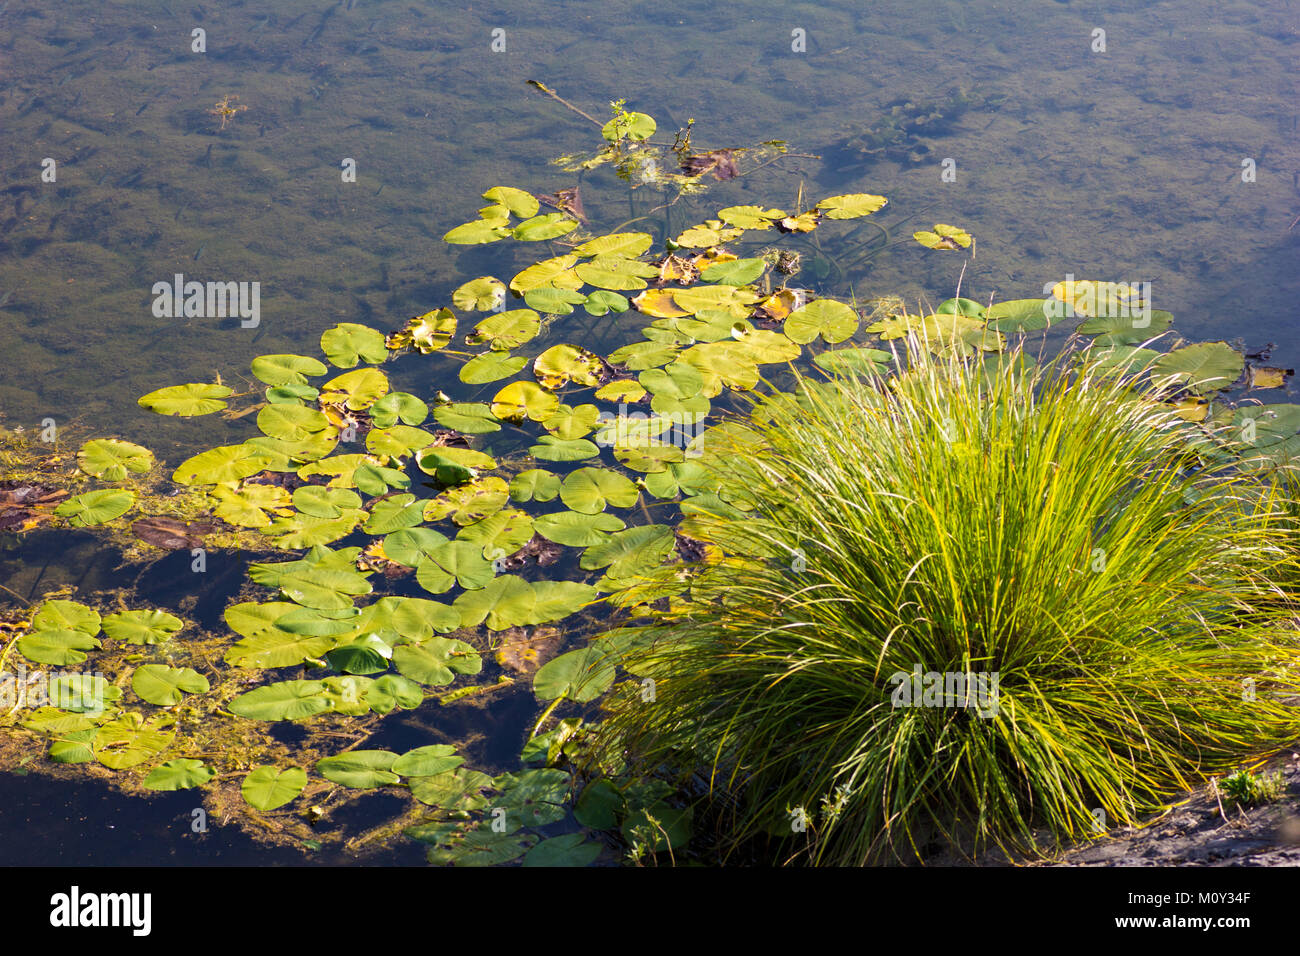 Lilly pads and grass at the side of the River Gacka, Otocac, Croatia, 2017 Stock Photo